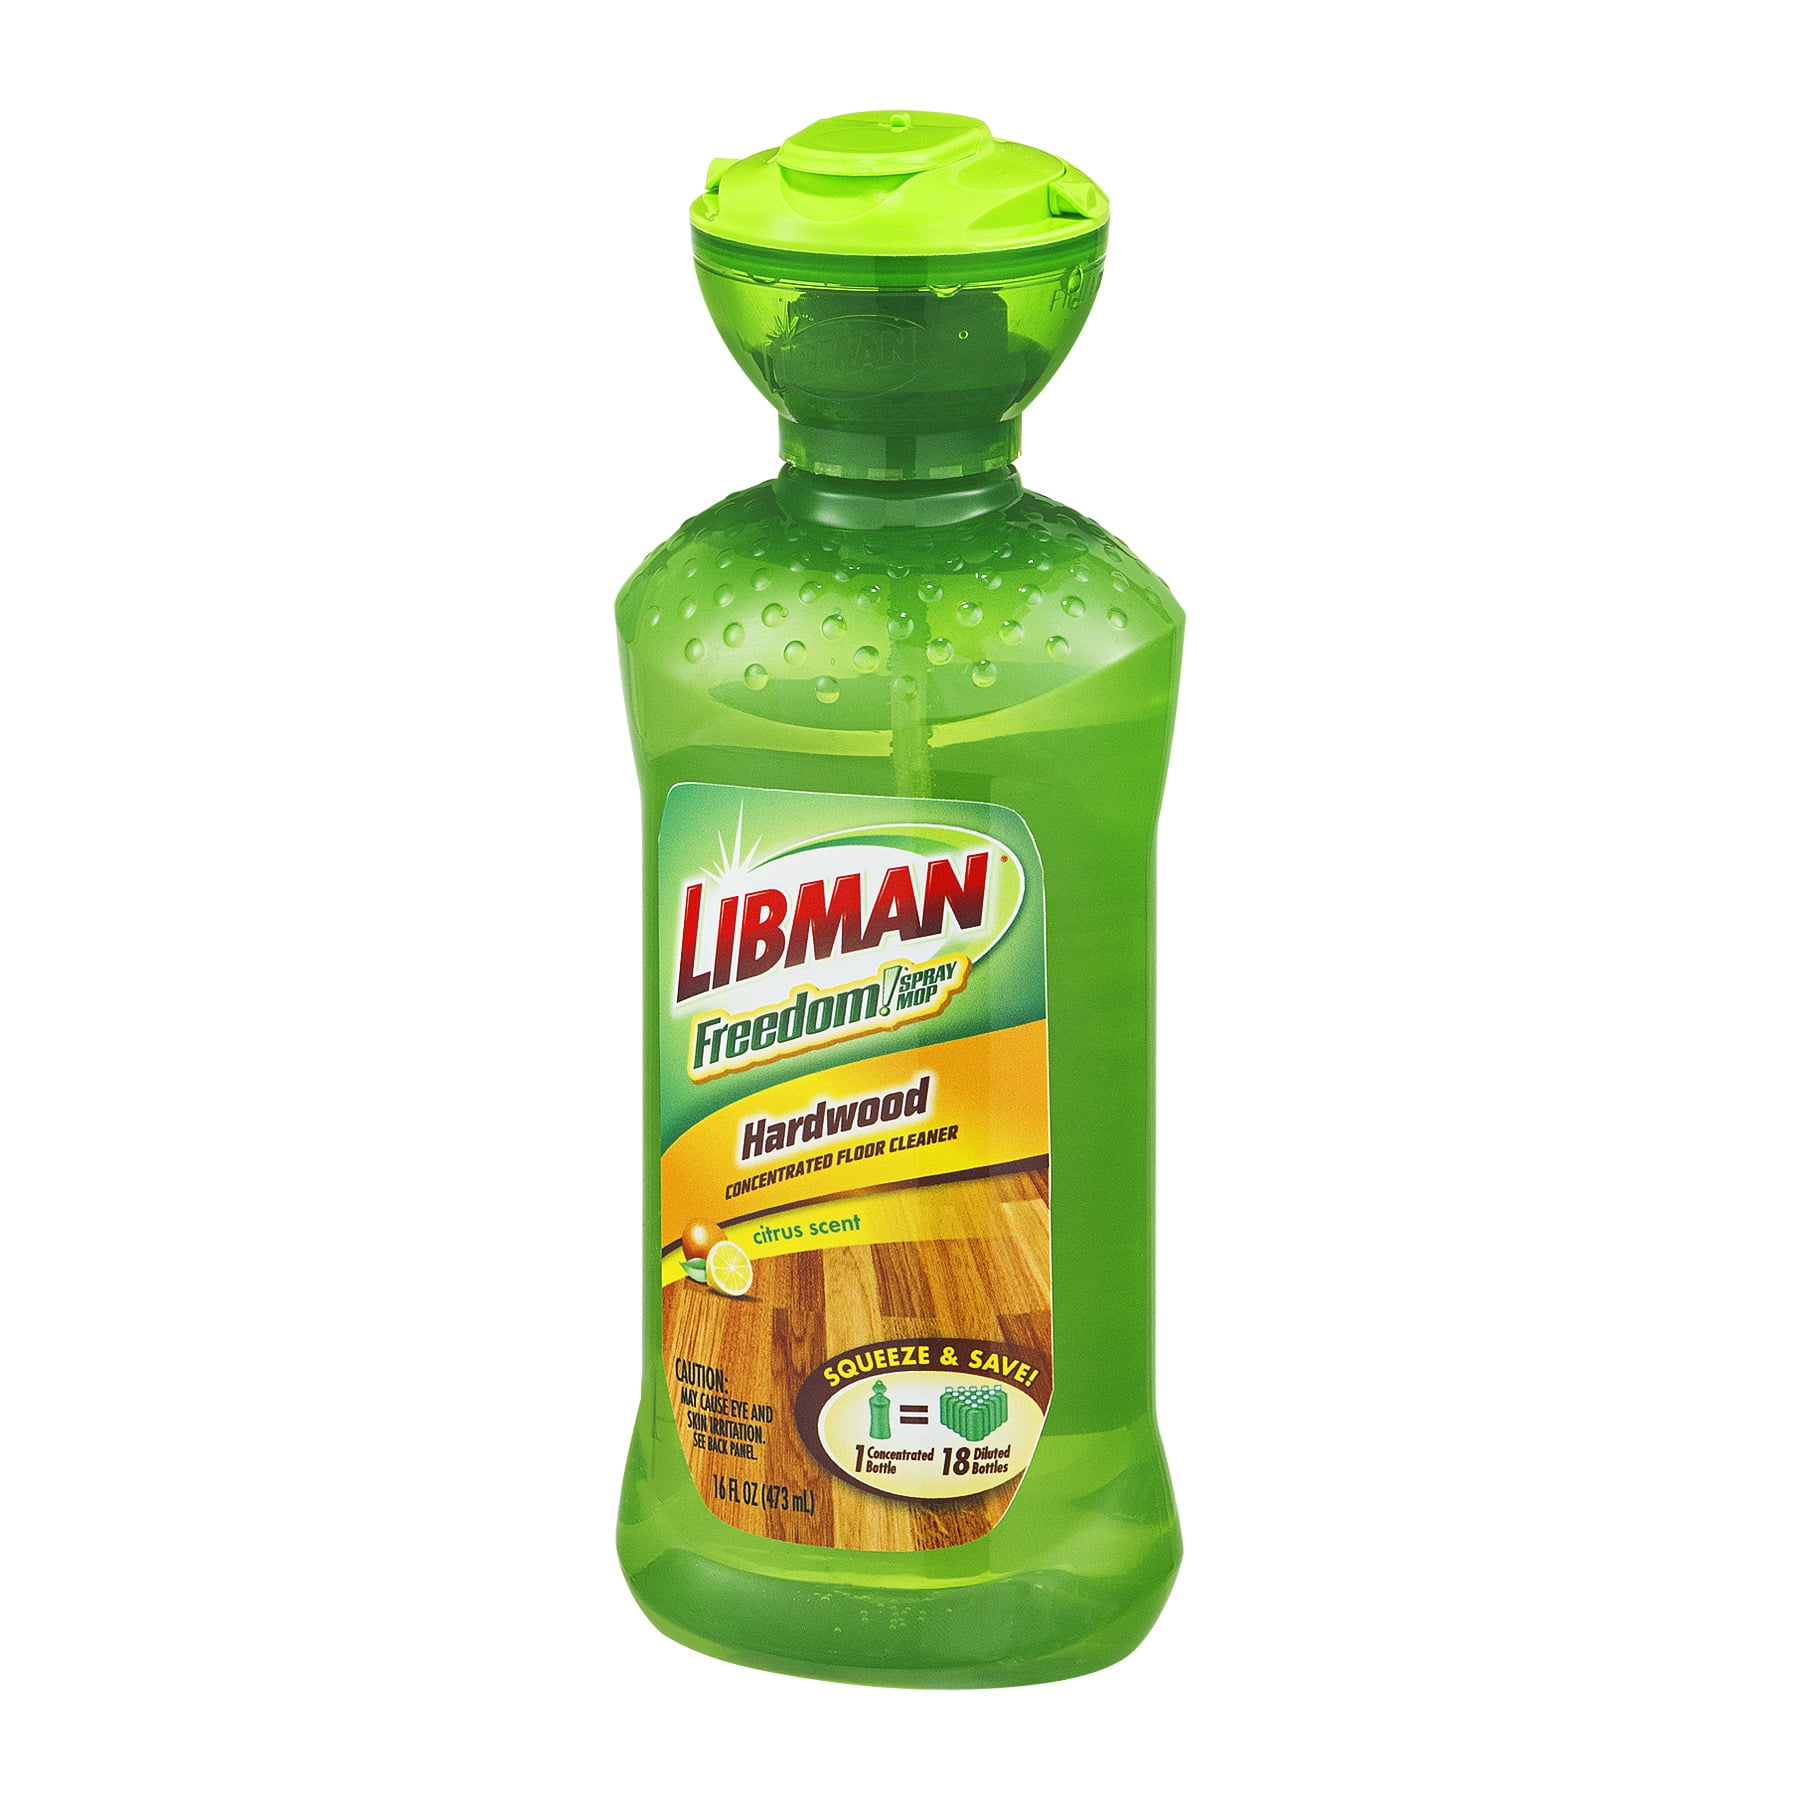 Libman Hardwood Concentrated Floor Cleaner 16 oz